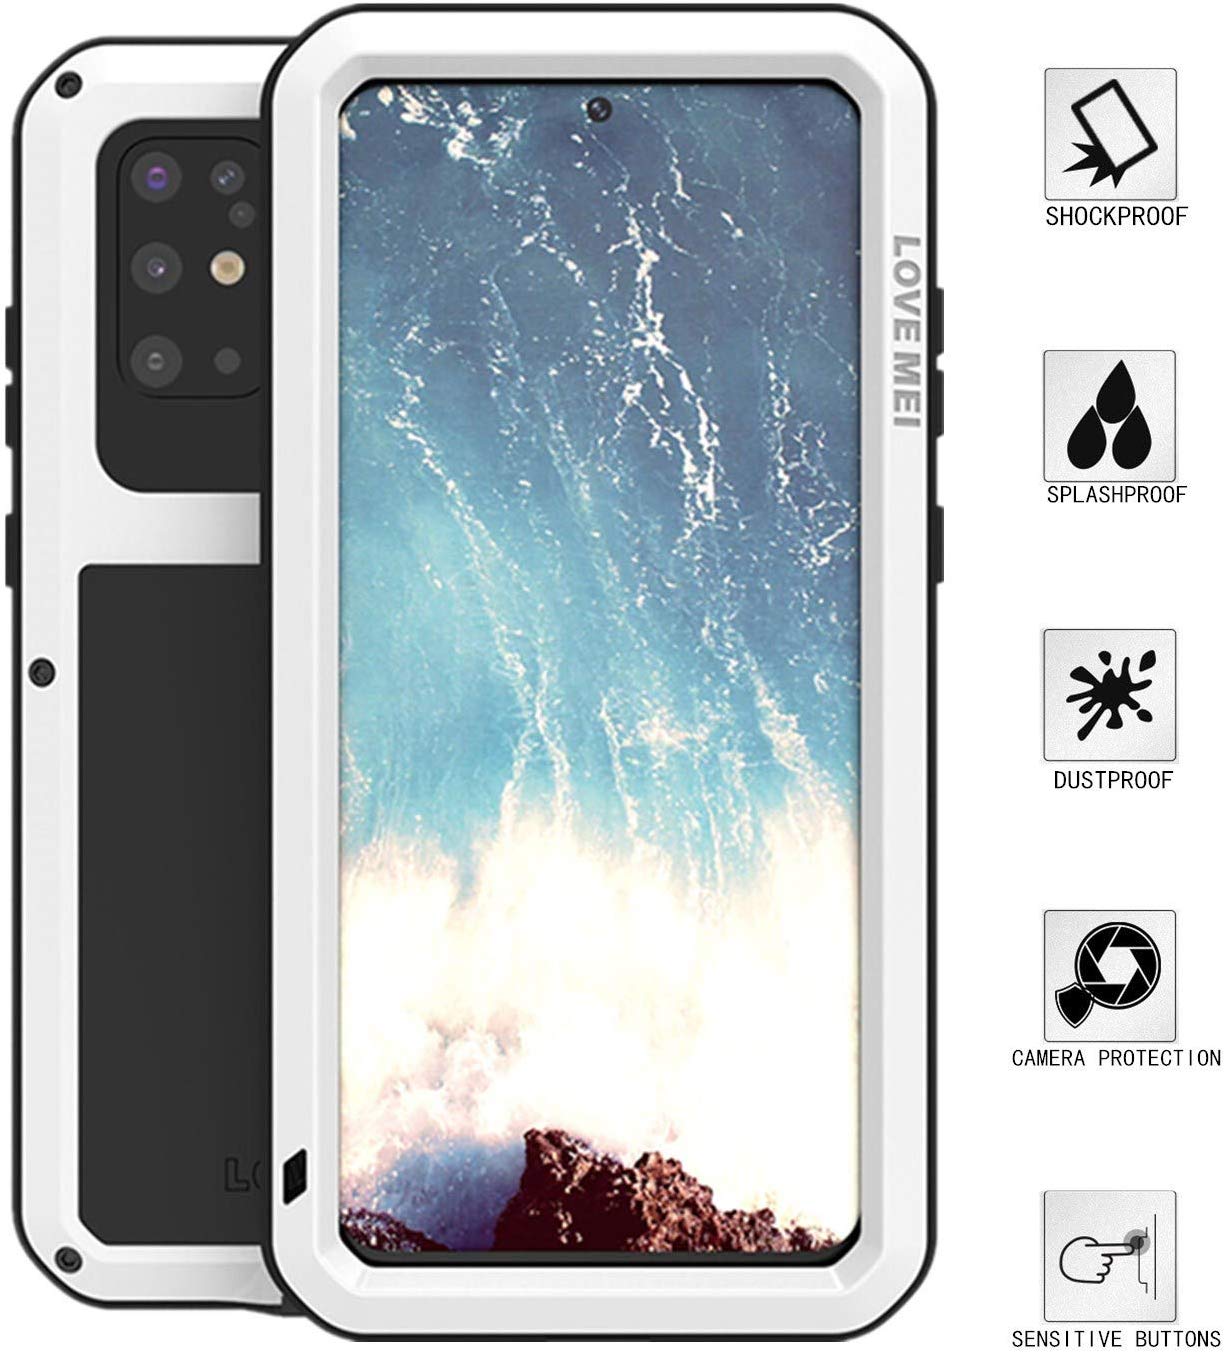 High Quality Aluminum Aluminum Metal Gorilla Glass Waterproof Shockproof Military Heavy Duty Sturdy Protector Cover Hard Case For Samsung Galaxy